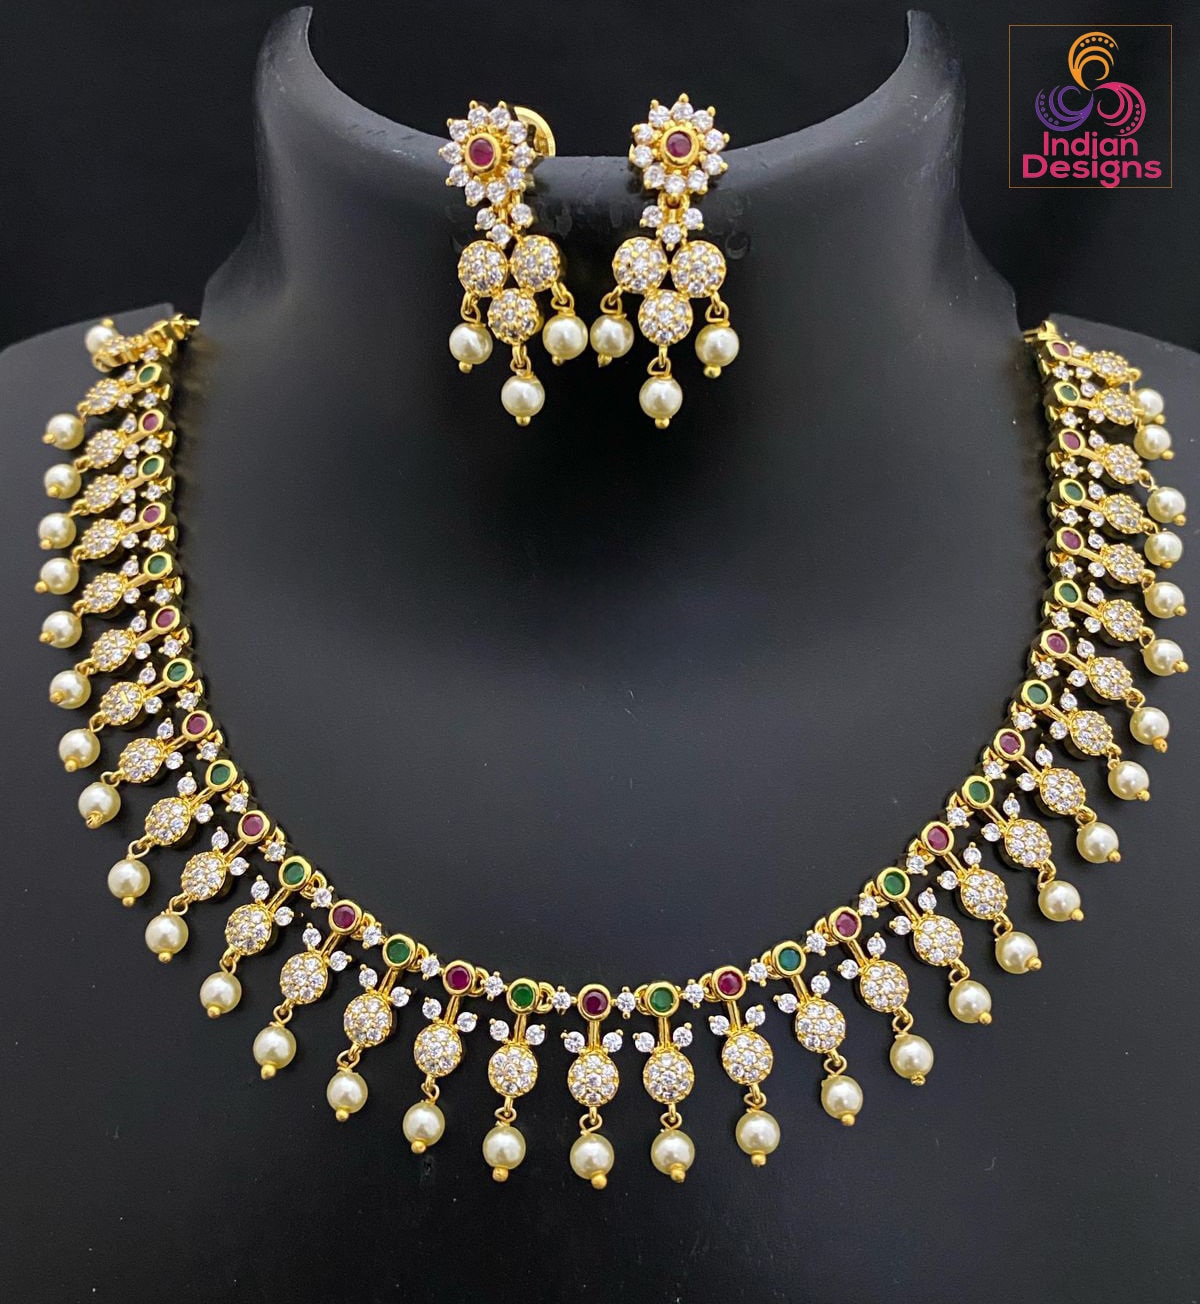 Gold Plated American diamond necklace set with Pearl Drop| Trendy South Indian style Fashion Jewelry| One gram gold CZ AD necklace Earrings